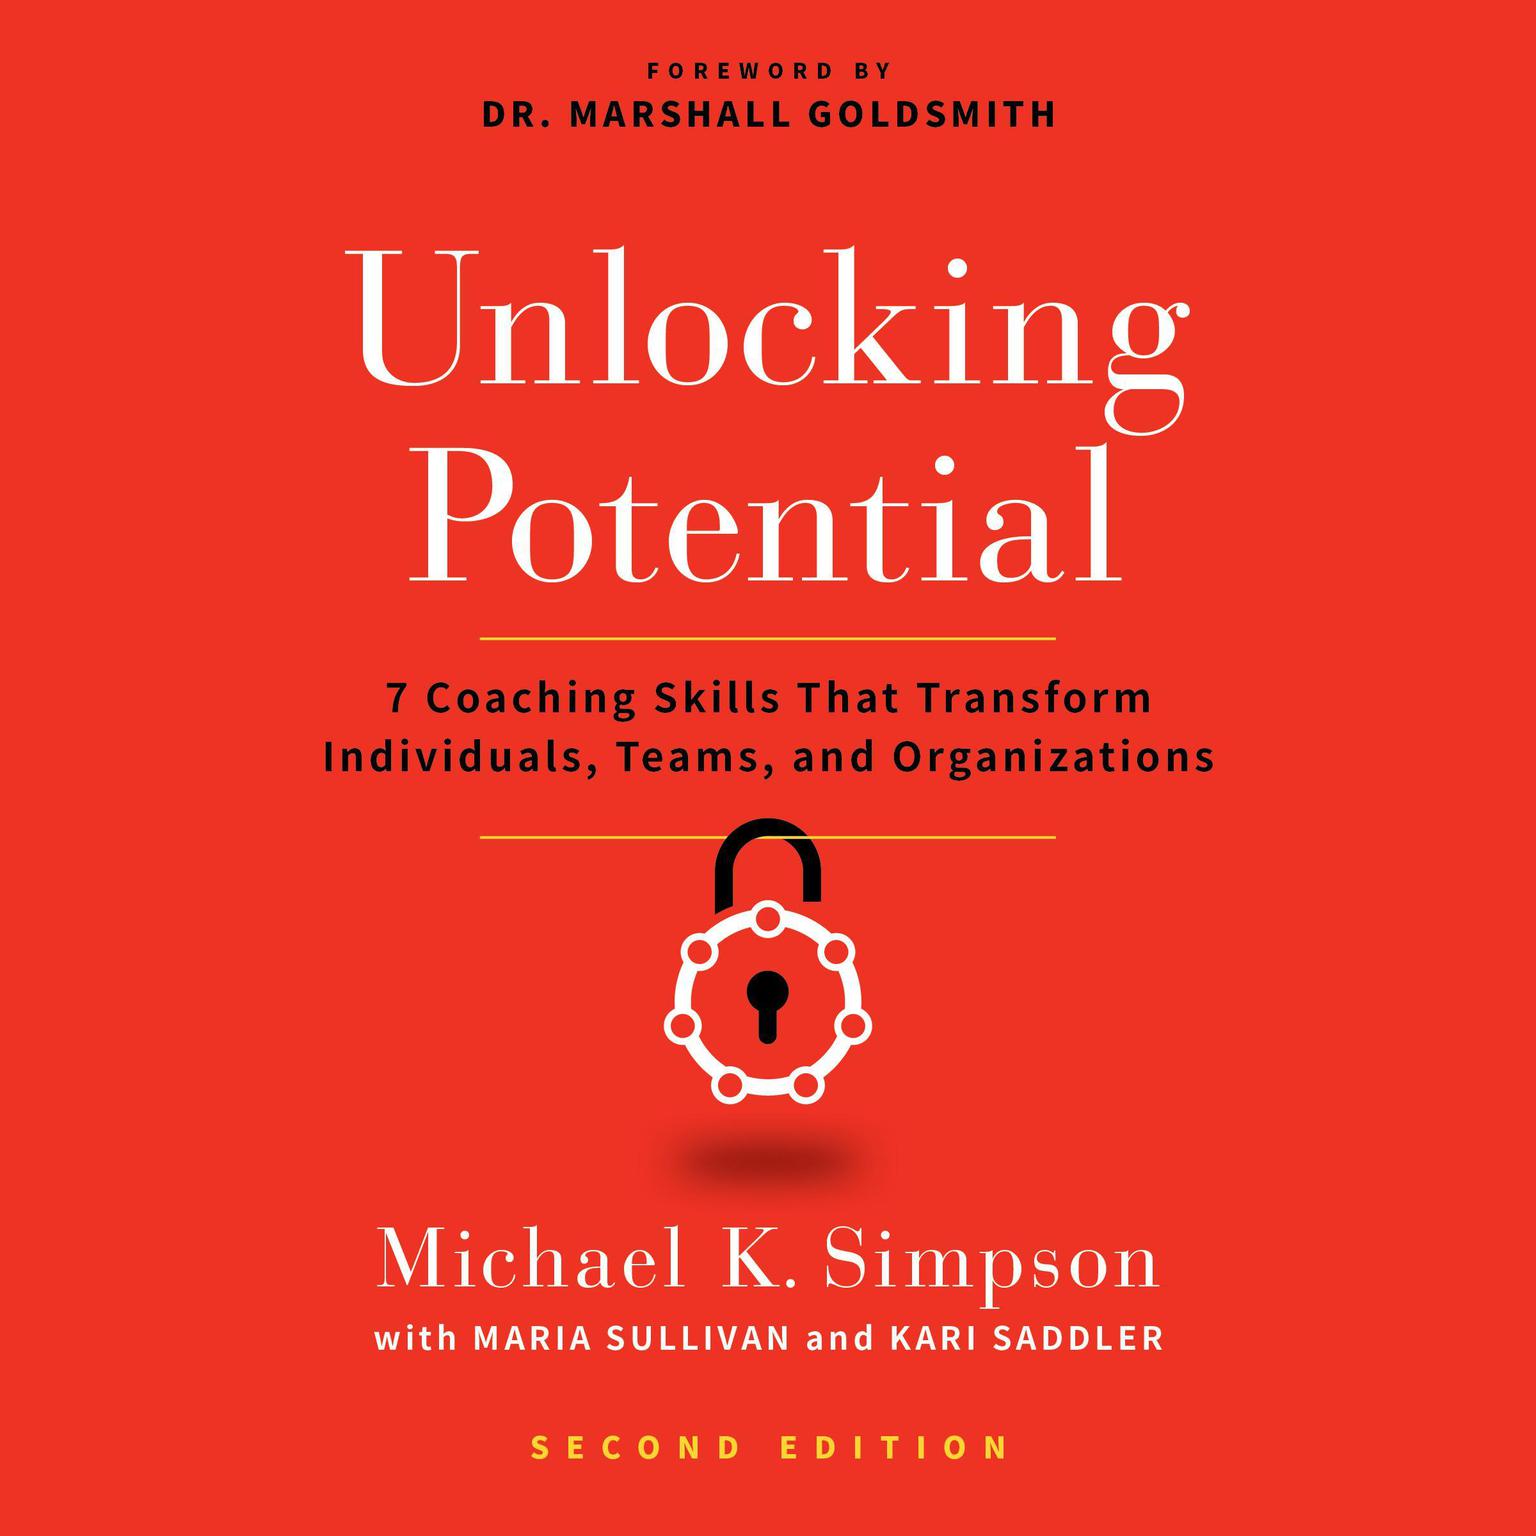 Unlocking Potential, Second Edition: 7 Coaching Skills That Transform Individuals, Teams, and Organizations Audiobook, by Michael K. Simpson